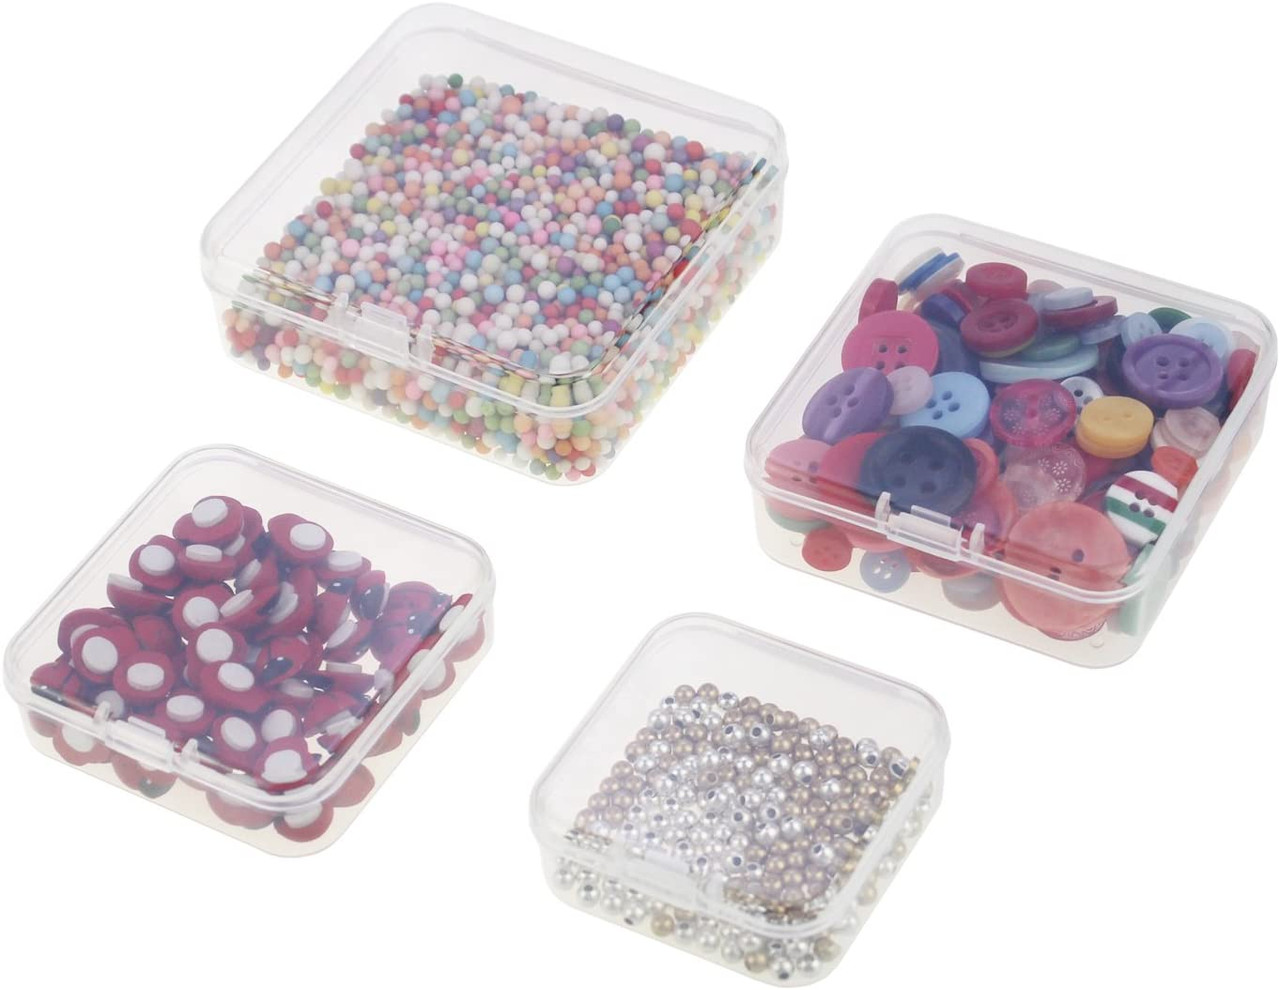 32 Pieces Mixed Sizes Square Empty Mini Clear Plastic Storage Containers  Box Case with Lids for Small Items and Other Craft Projects